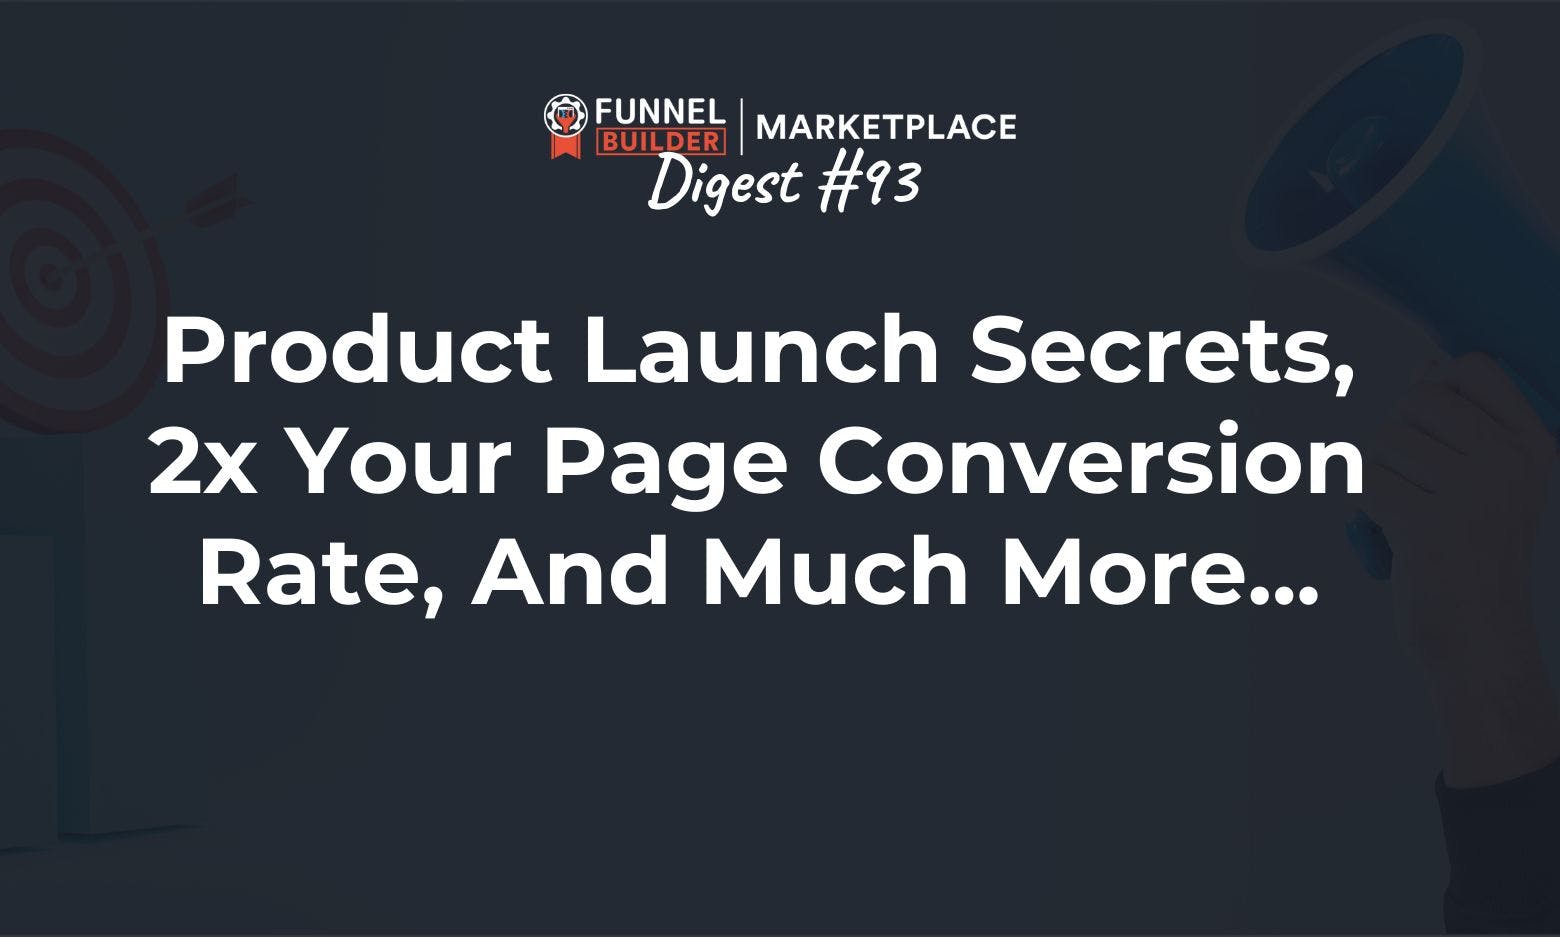 FBM Digest #93: Product launch secrets, 2x your page conversion rate, and much more...